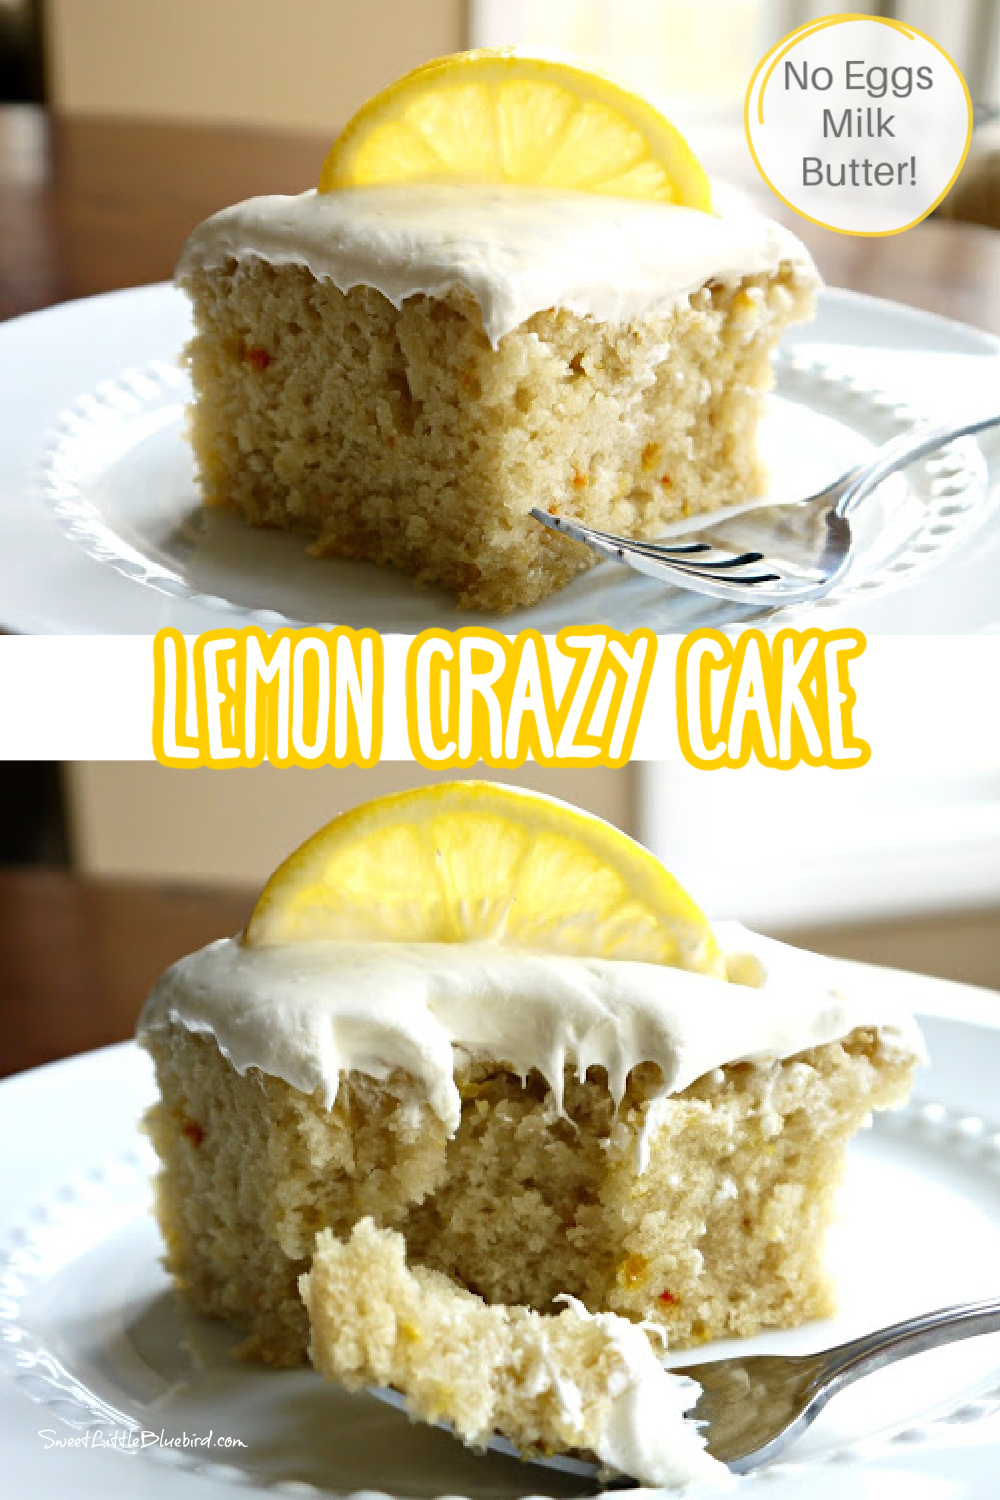 2 photo collage - top photo has a piece of lemon crazy cake on a white plate with a fork. The bottom photo is a piece of Lemon Crazy Cake on a plate with a fork with a piece of cake, ready to eat.